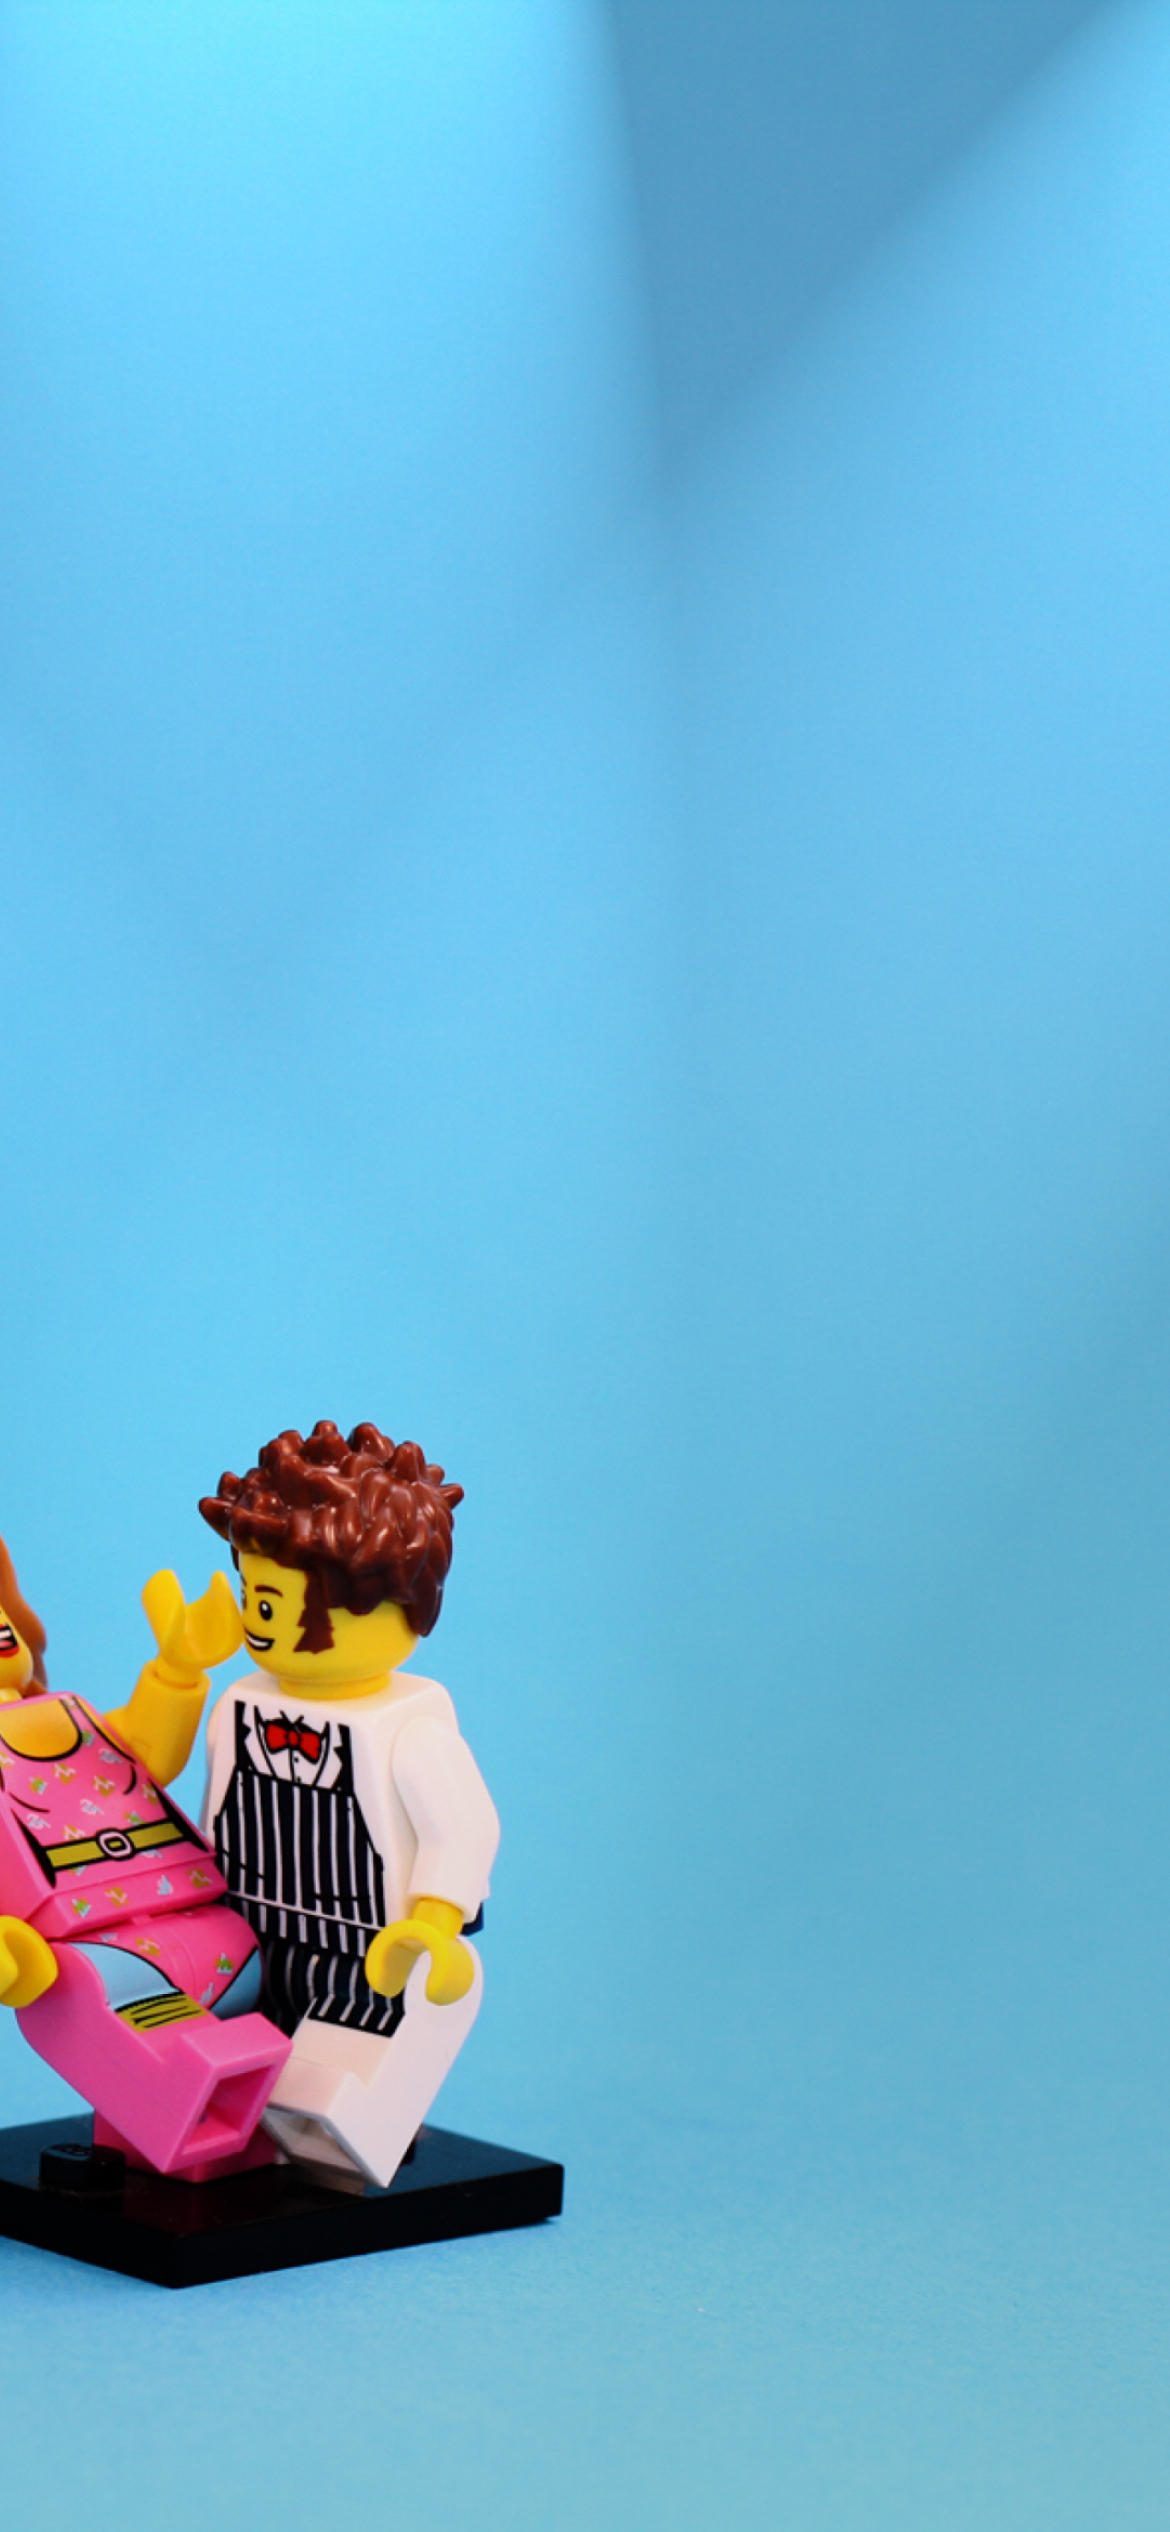 Dance With Me Lego wallpaper 1170x2532